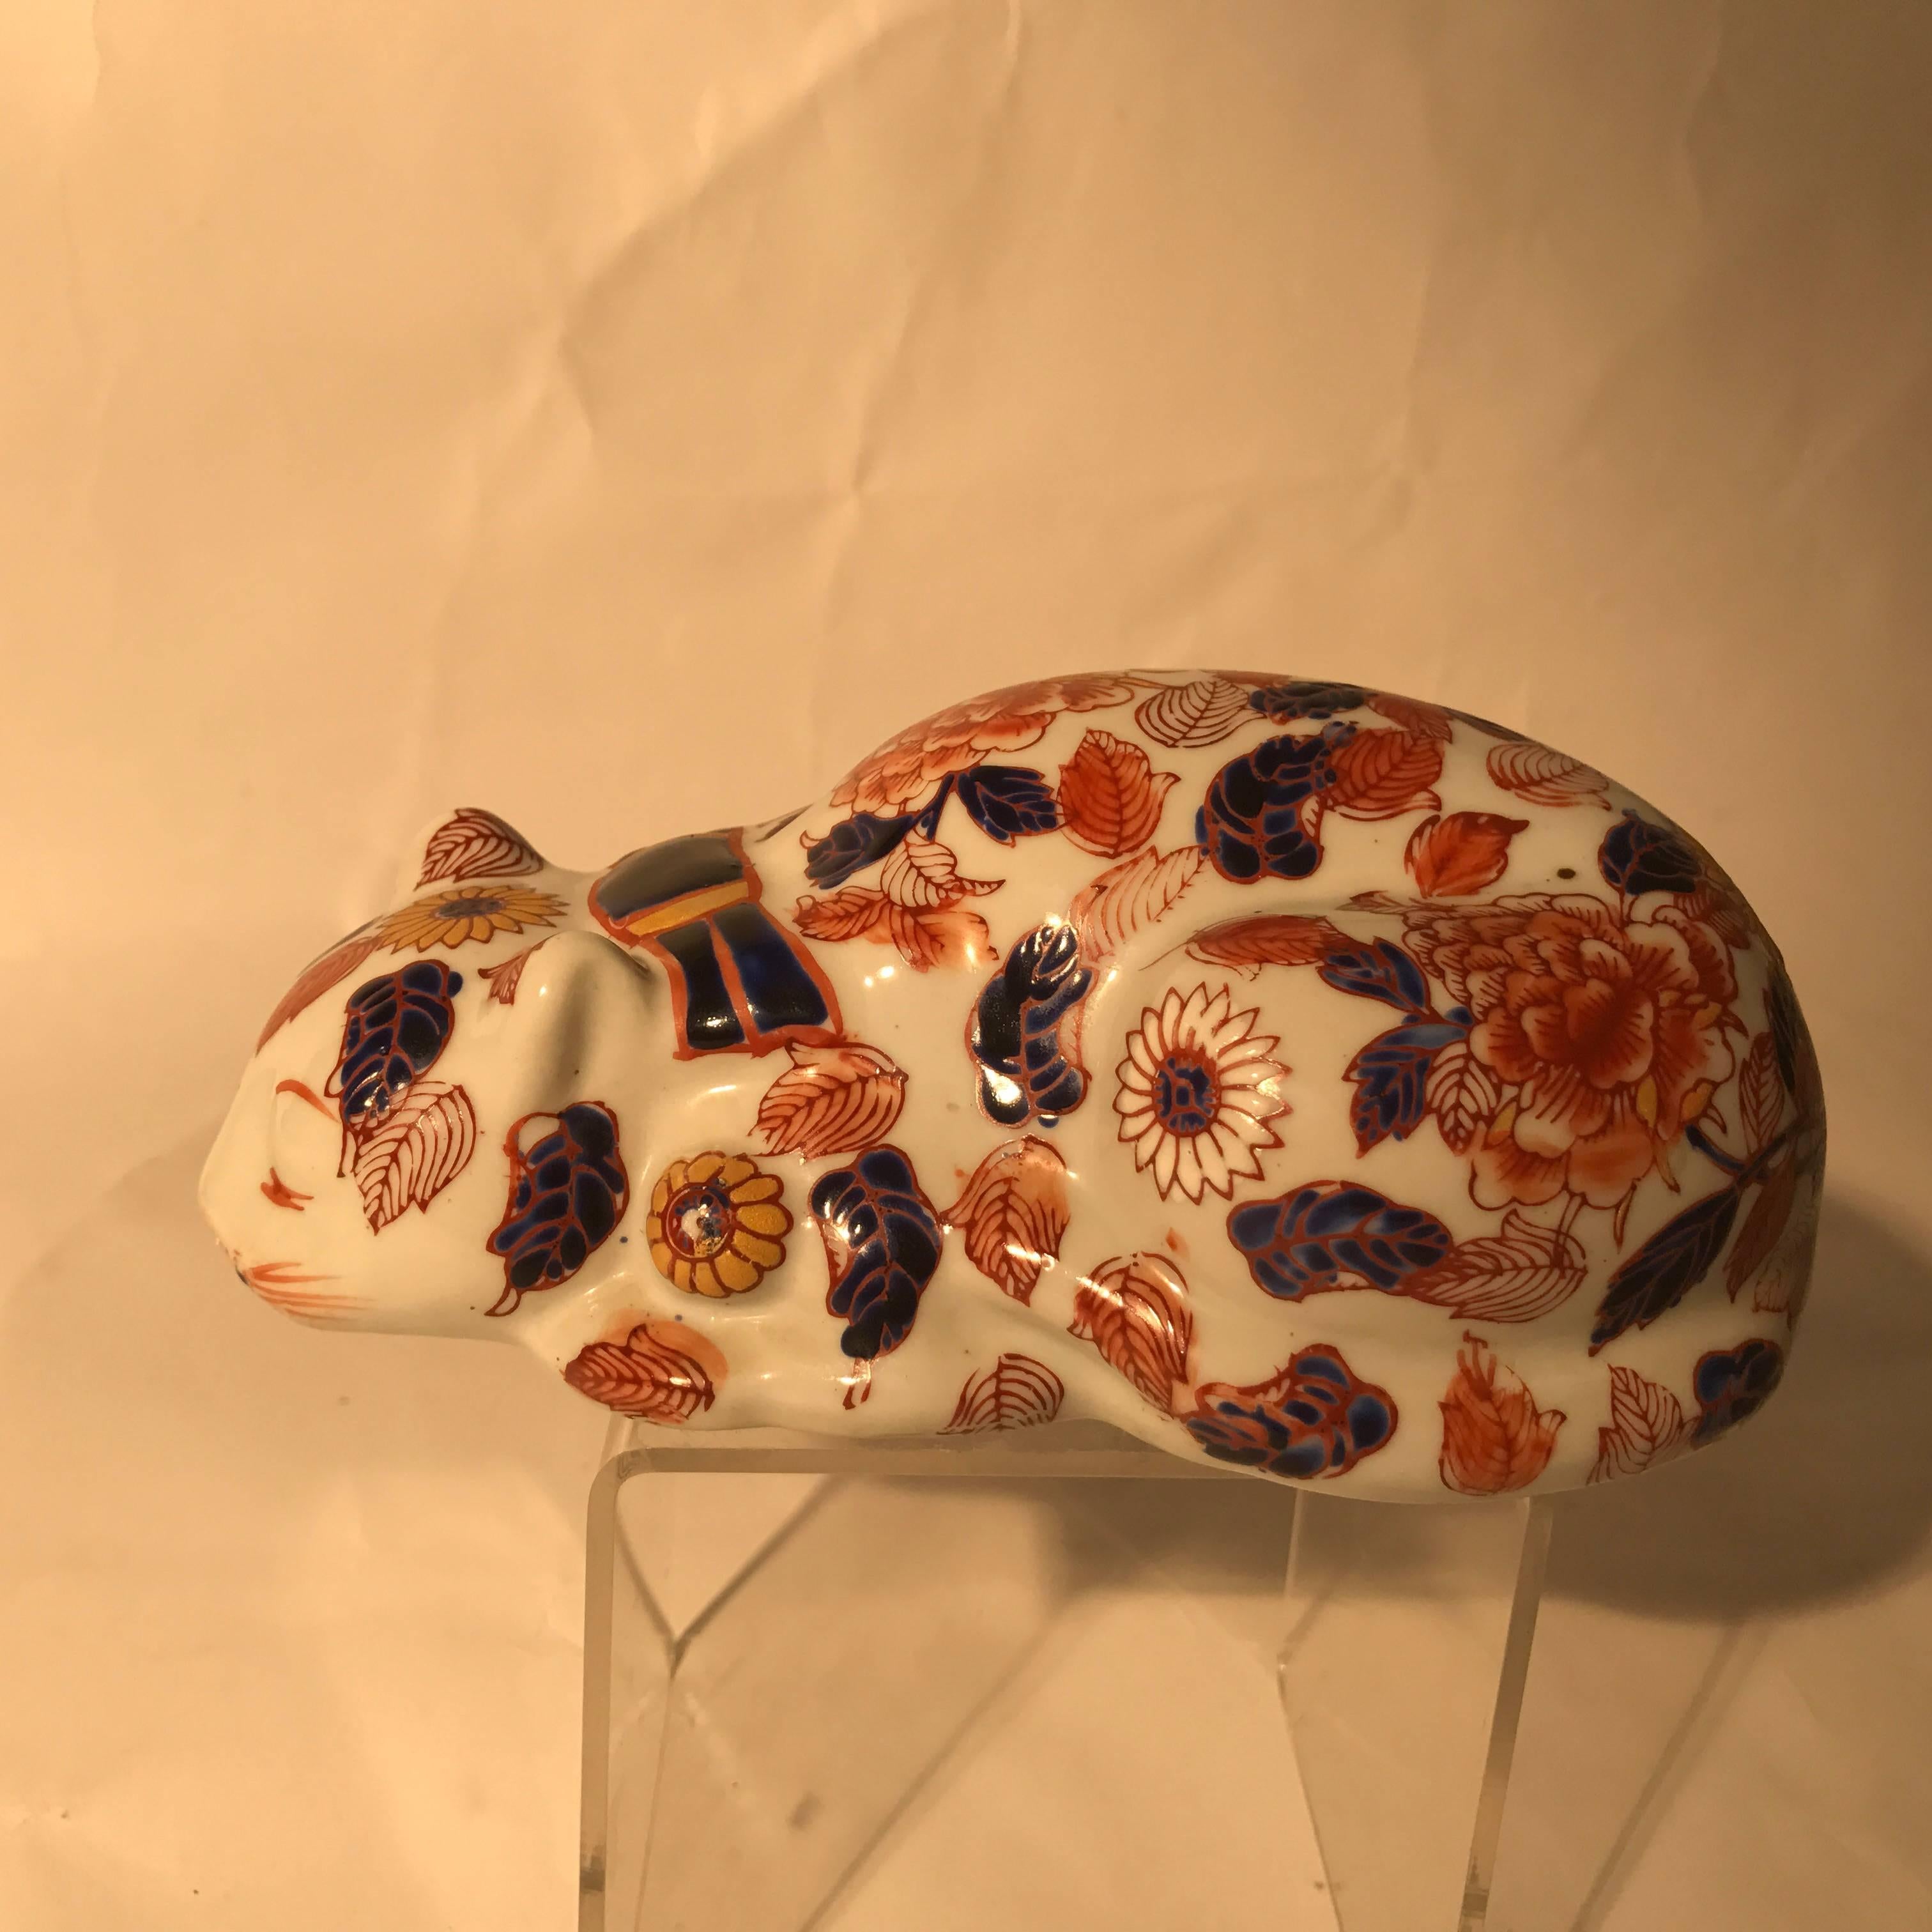 Taisho Japanese Antique Red Enameled Porcelain Crouching Cat Sculpture, 1920